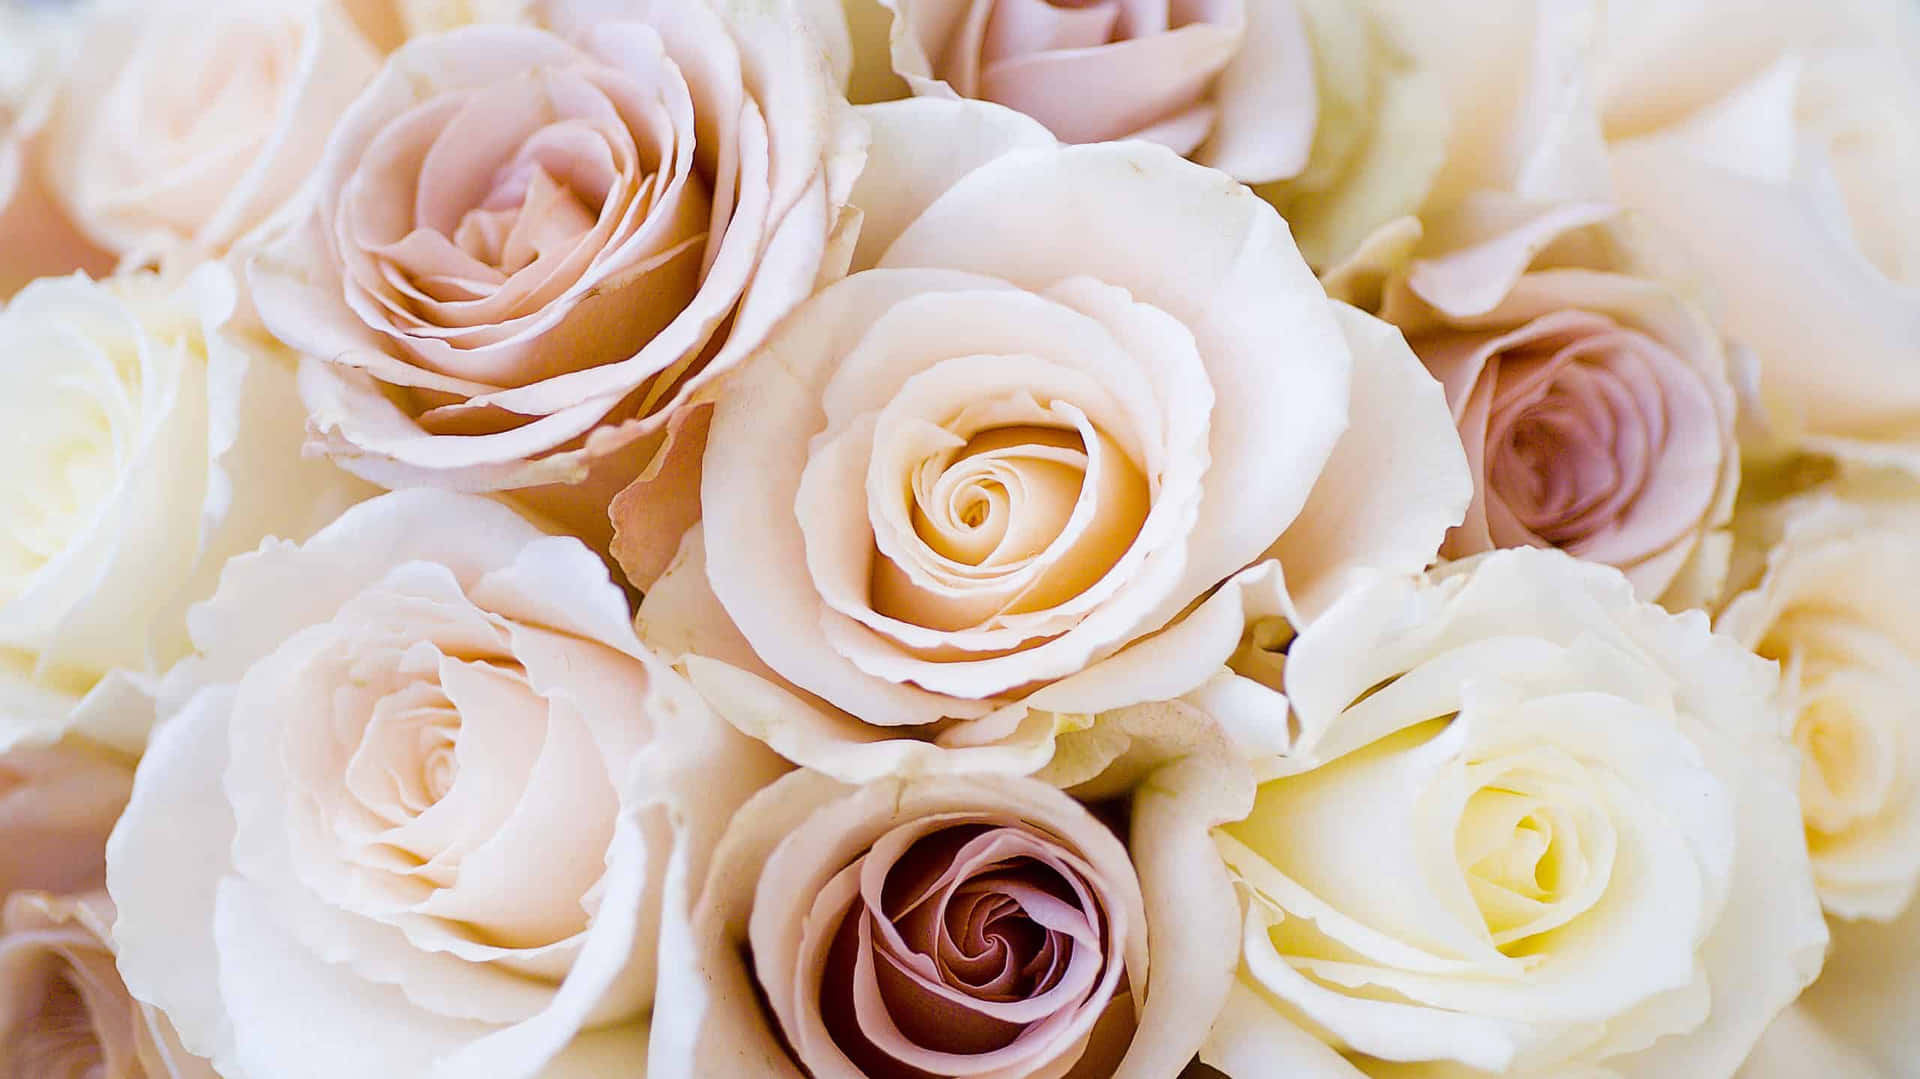 Beautiful Roses Wedding Flowers Close Up Photography Picture